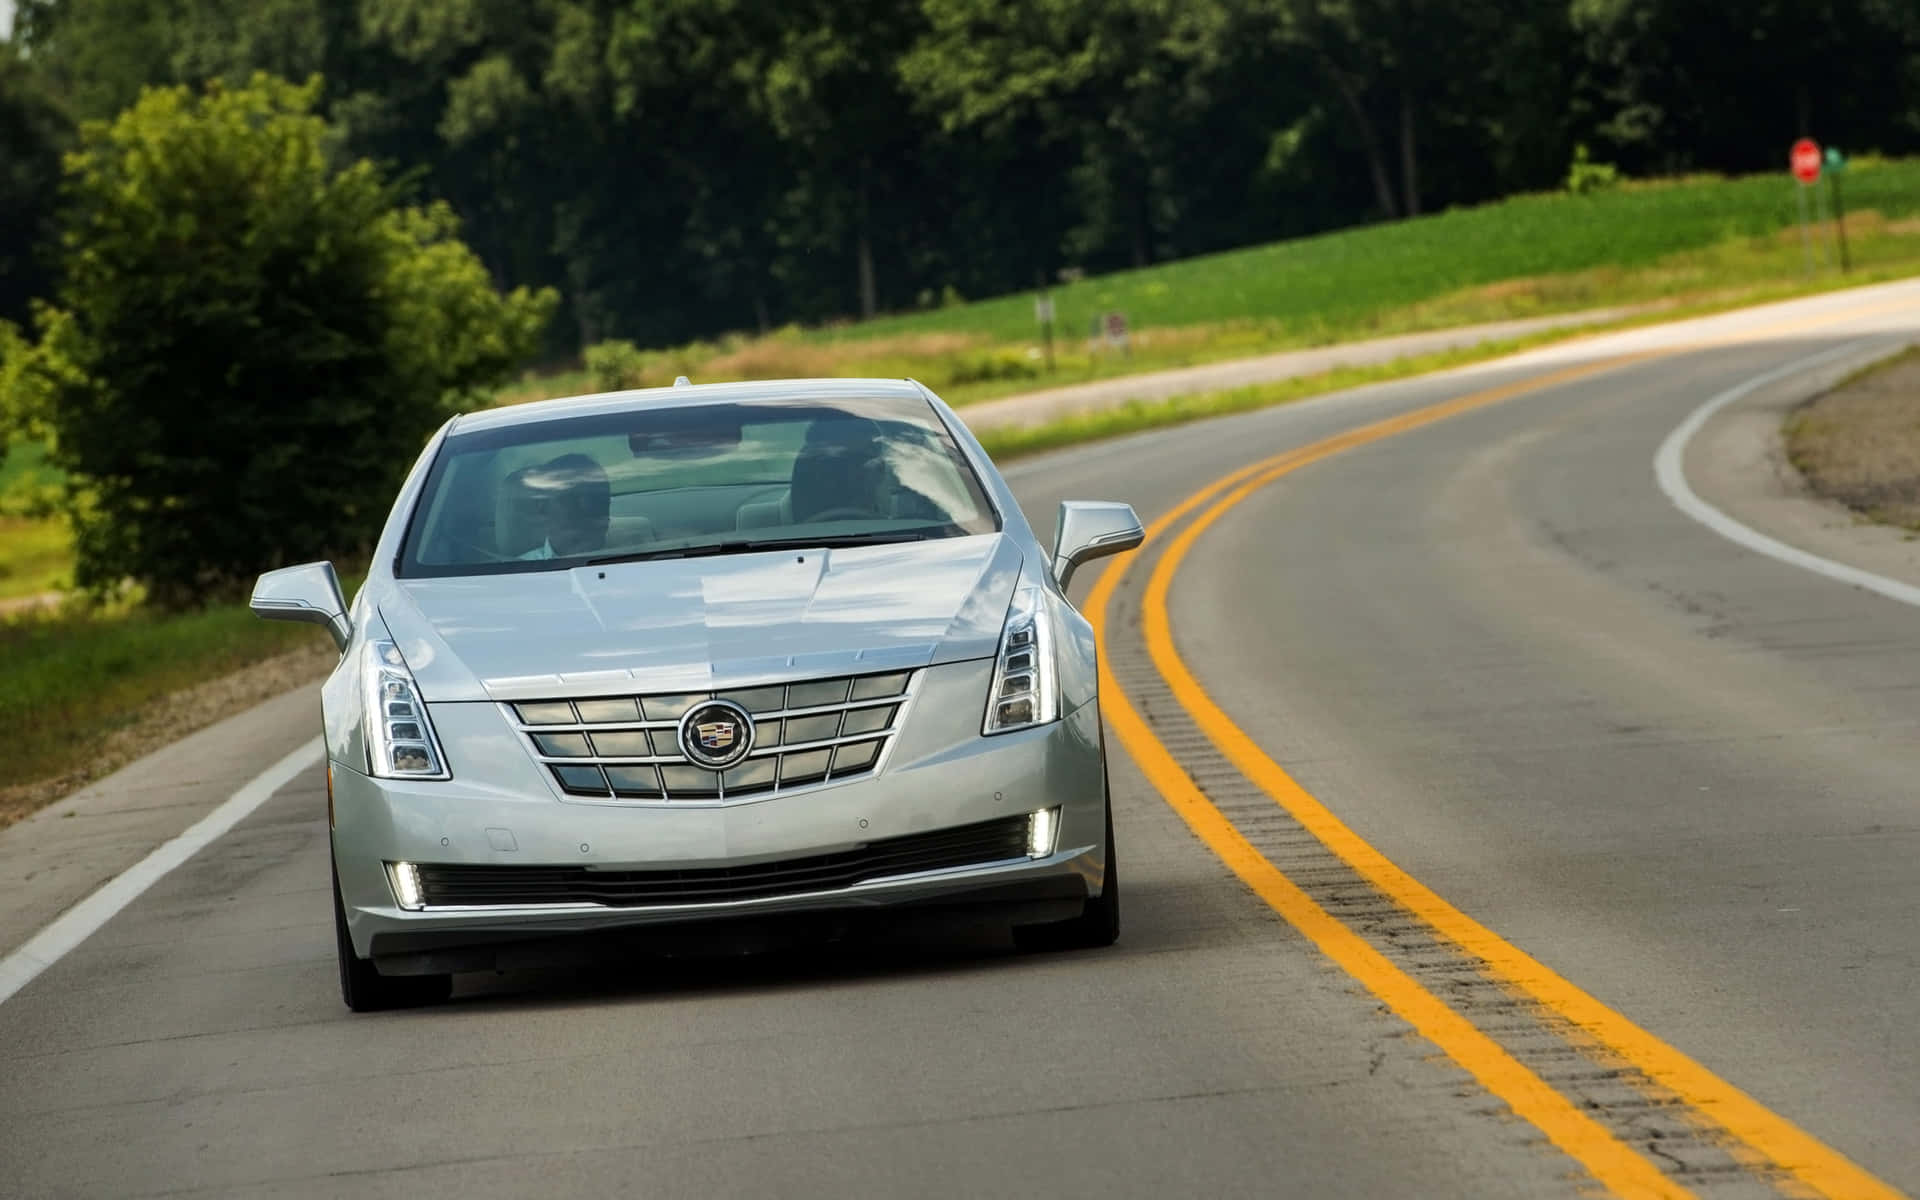 Cadillac ELR - A Luxury Electric Vehicle Wallpaper